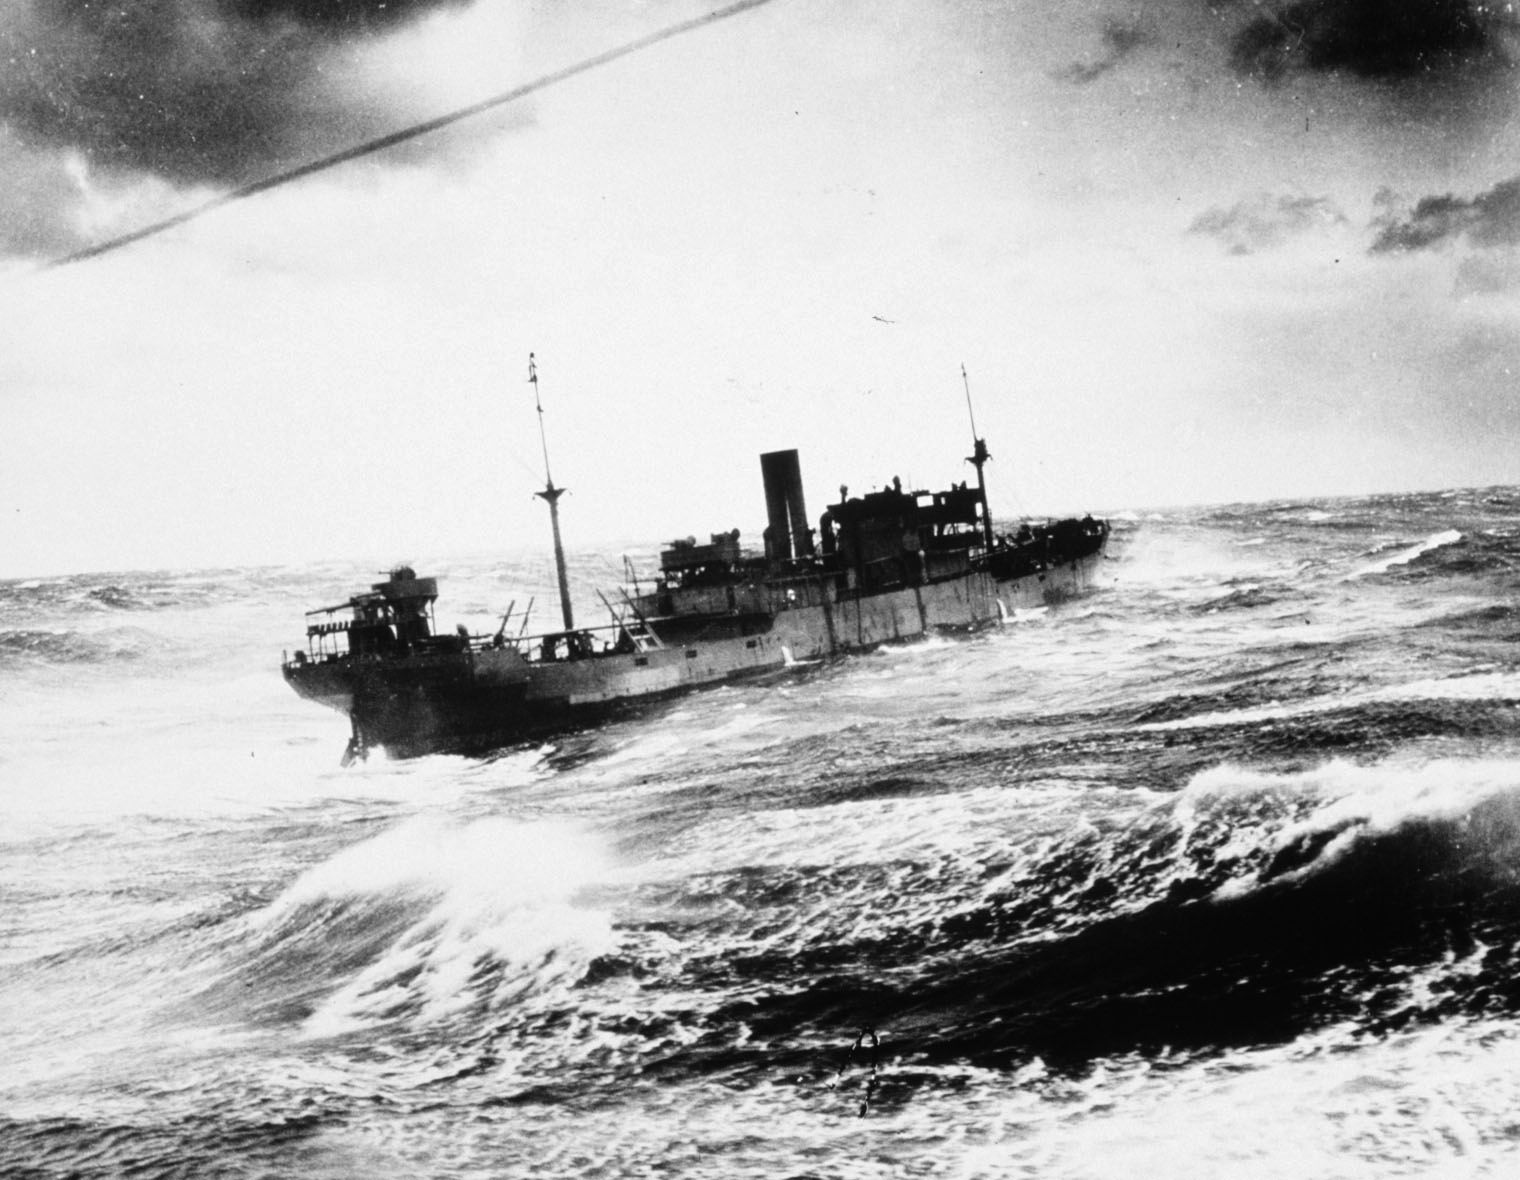 Making the dangerous passage across the North Atlantic to the Soviet port of Murmansk, the armed merchant ship SS Coulmore weathers heavy seas on May 20, 1943. 